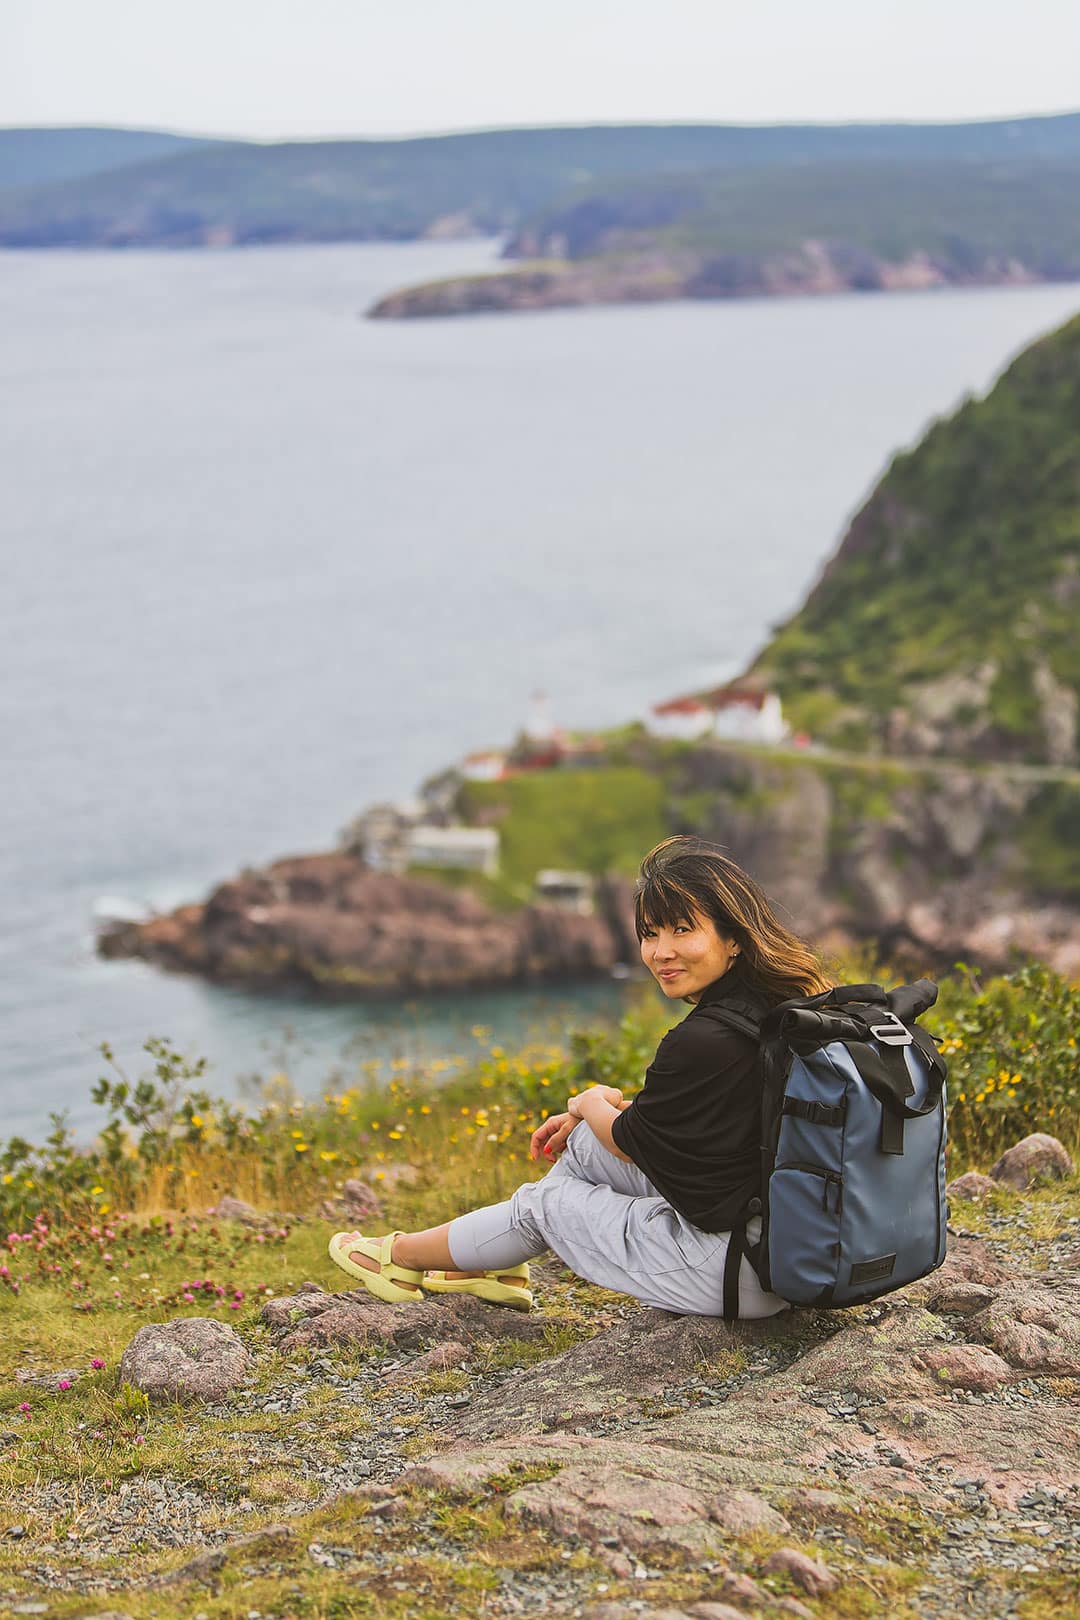 Signal Hill National Historic Site + 25 Unforgettable Things to Do in Newfoundland and Labrador